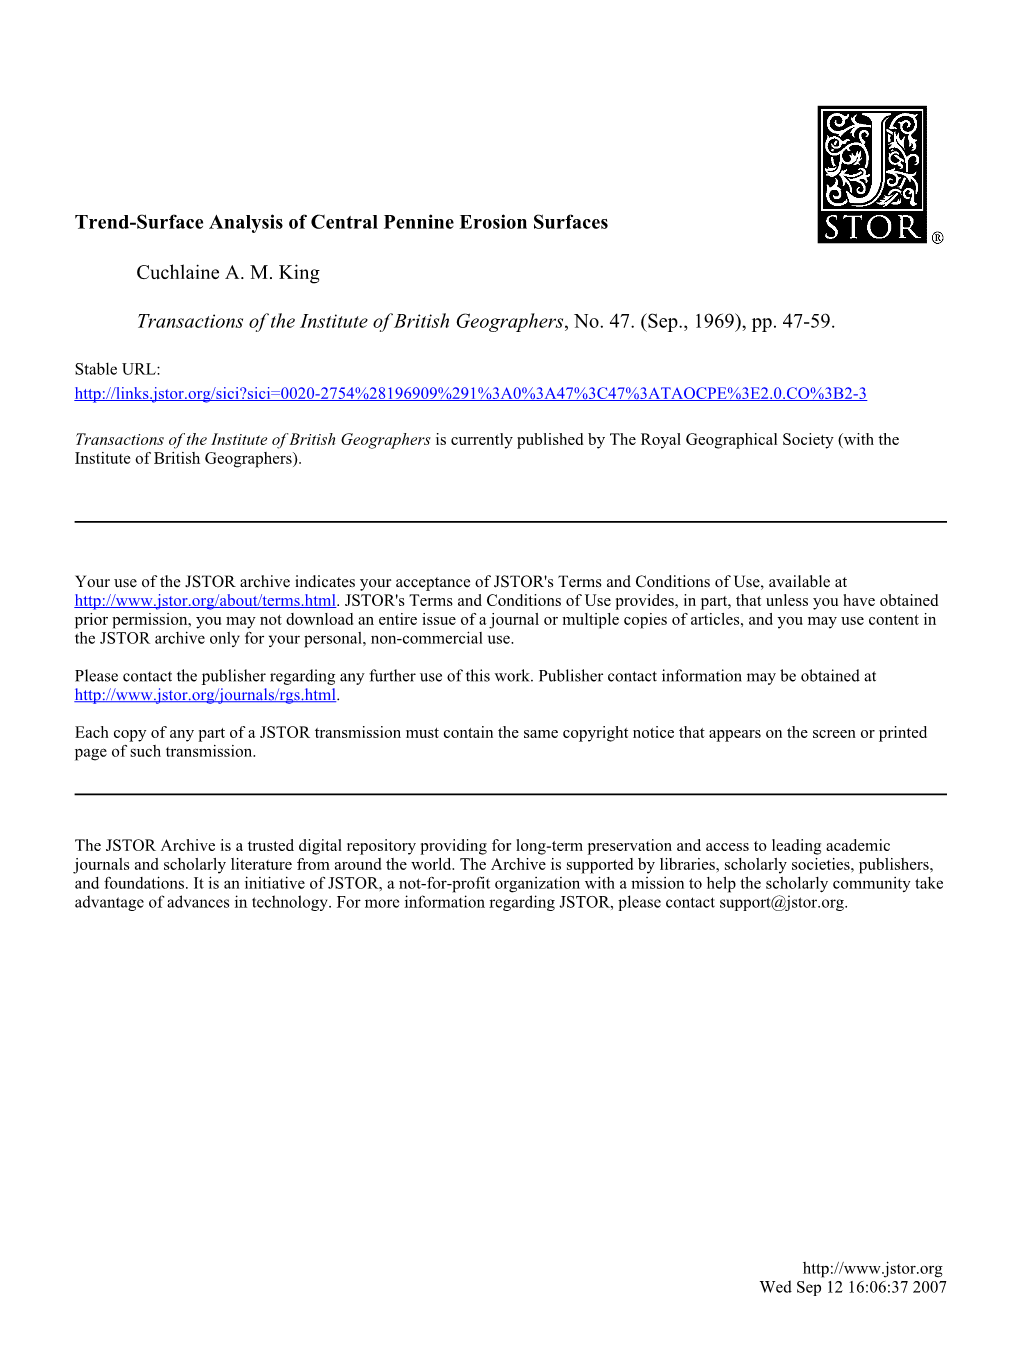 Trend-Surface Analysis of Central Pennine Erosion Surfaces